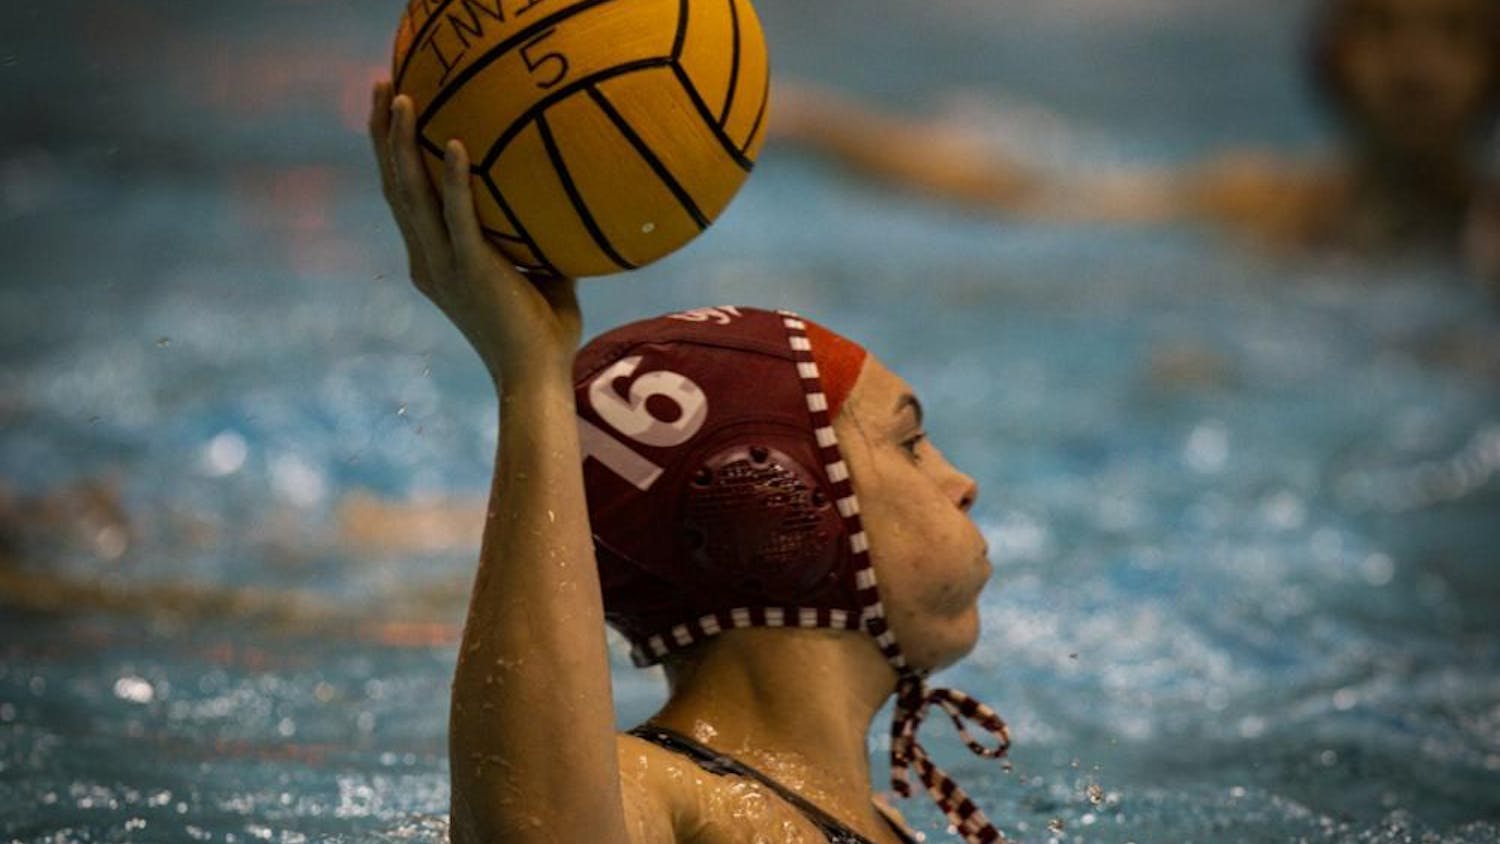 spiuwaterpolo012624.jpg